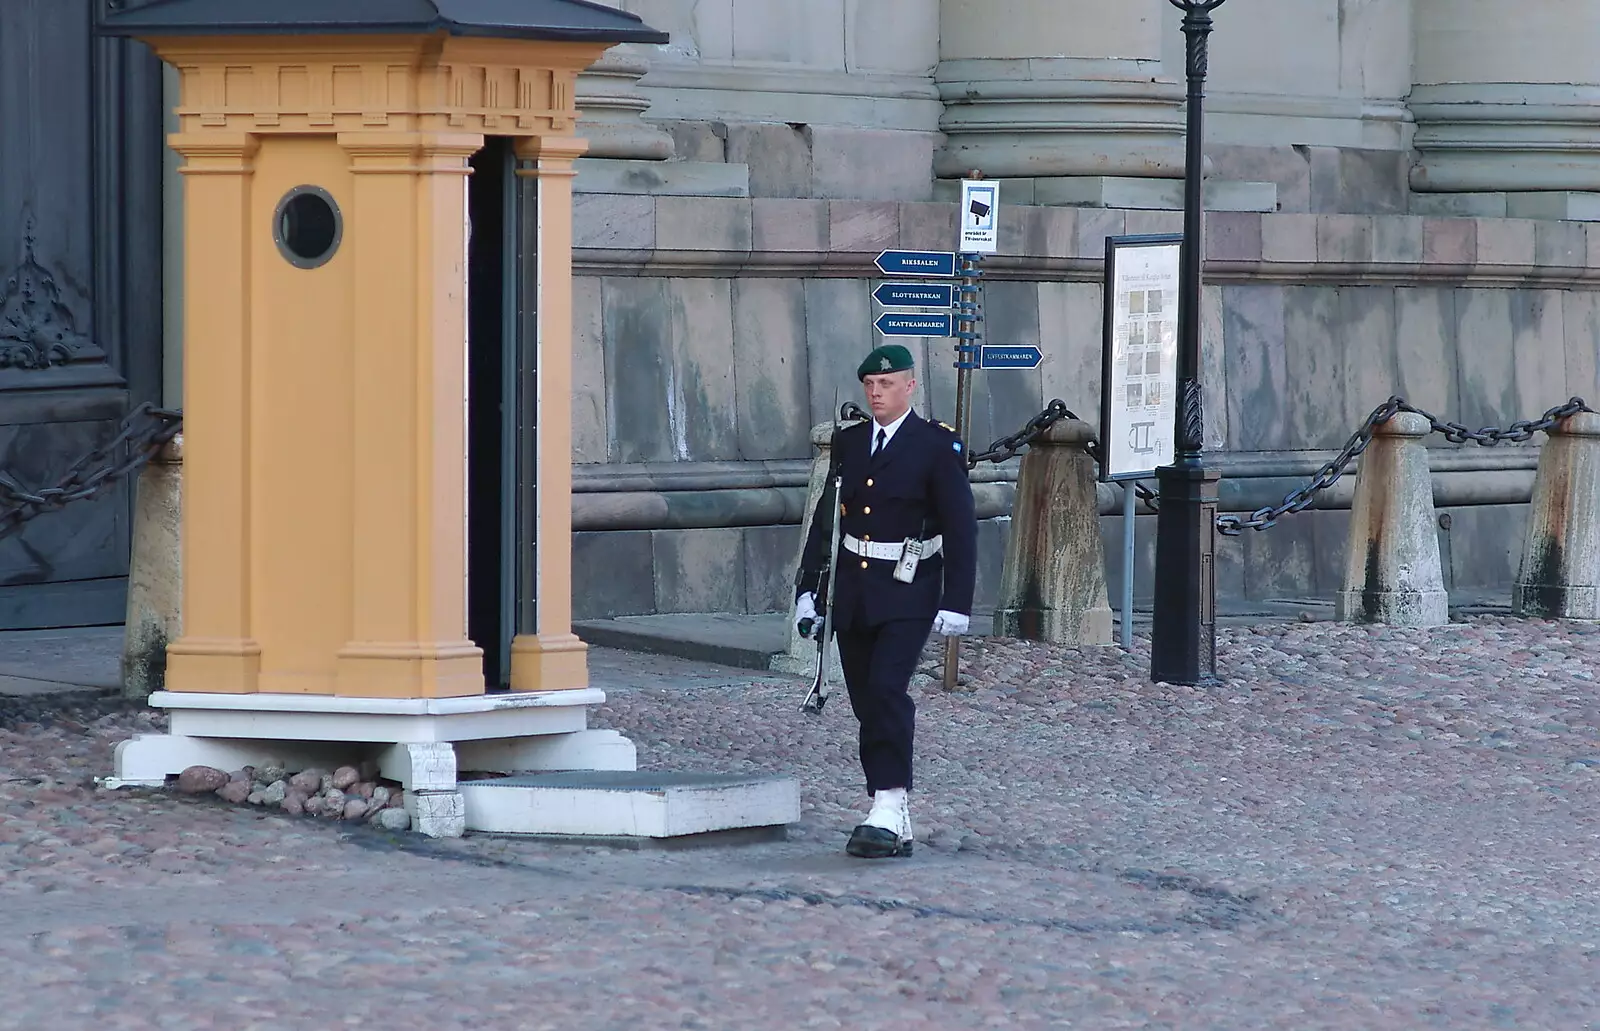 A guard patrols outside the Royal Palace, from A Postcard From Stockholm: A Working Trip to Sweden - 24th April 2005